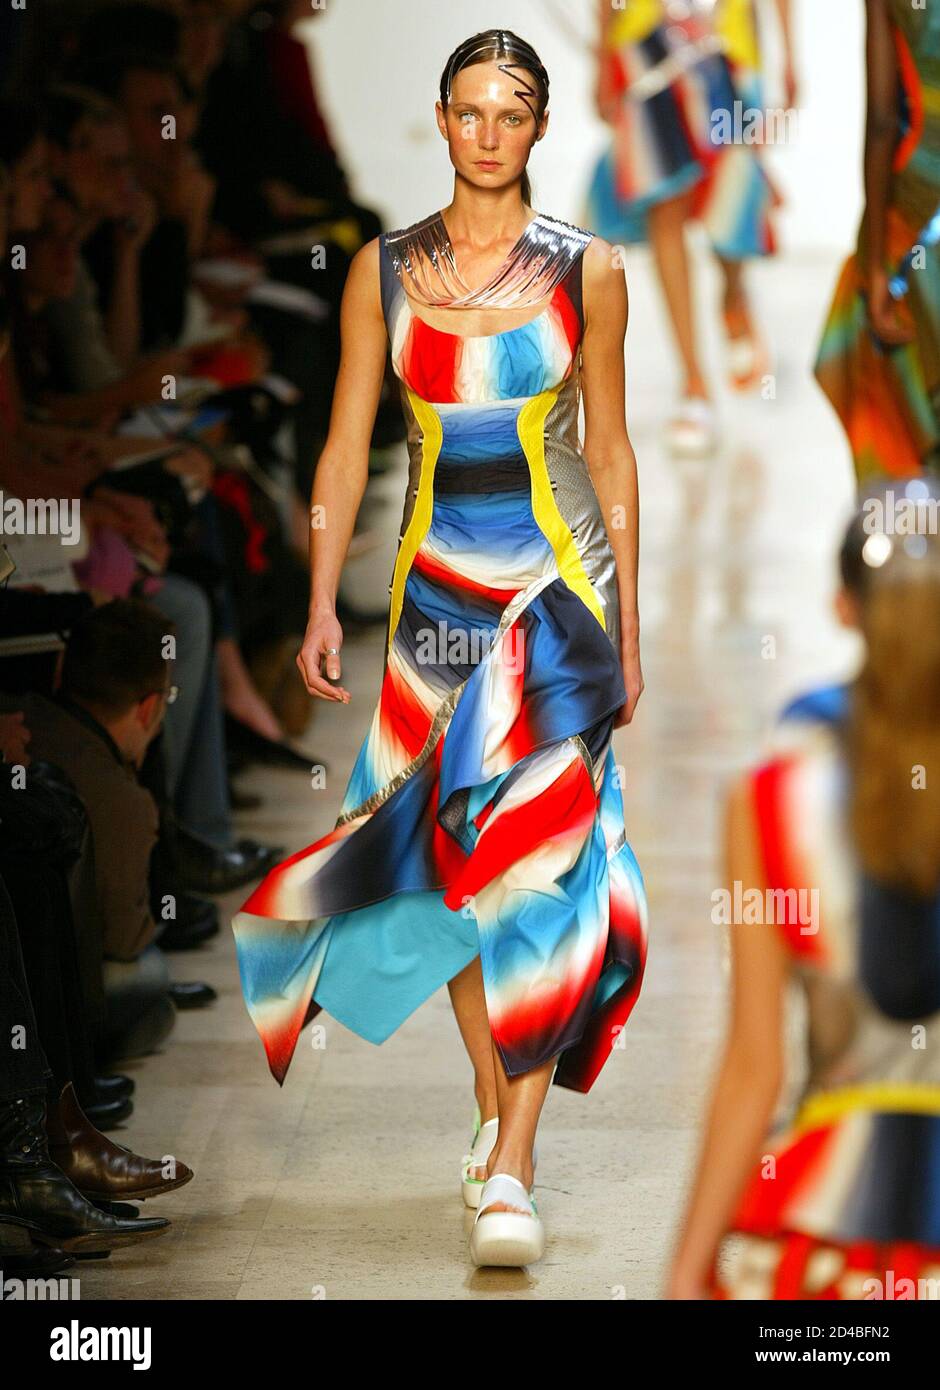 Page 3 - Japanese Model Catwalk High Resolution Stock Photography and  Images - Alamy